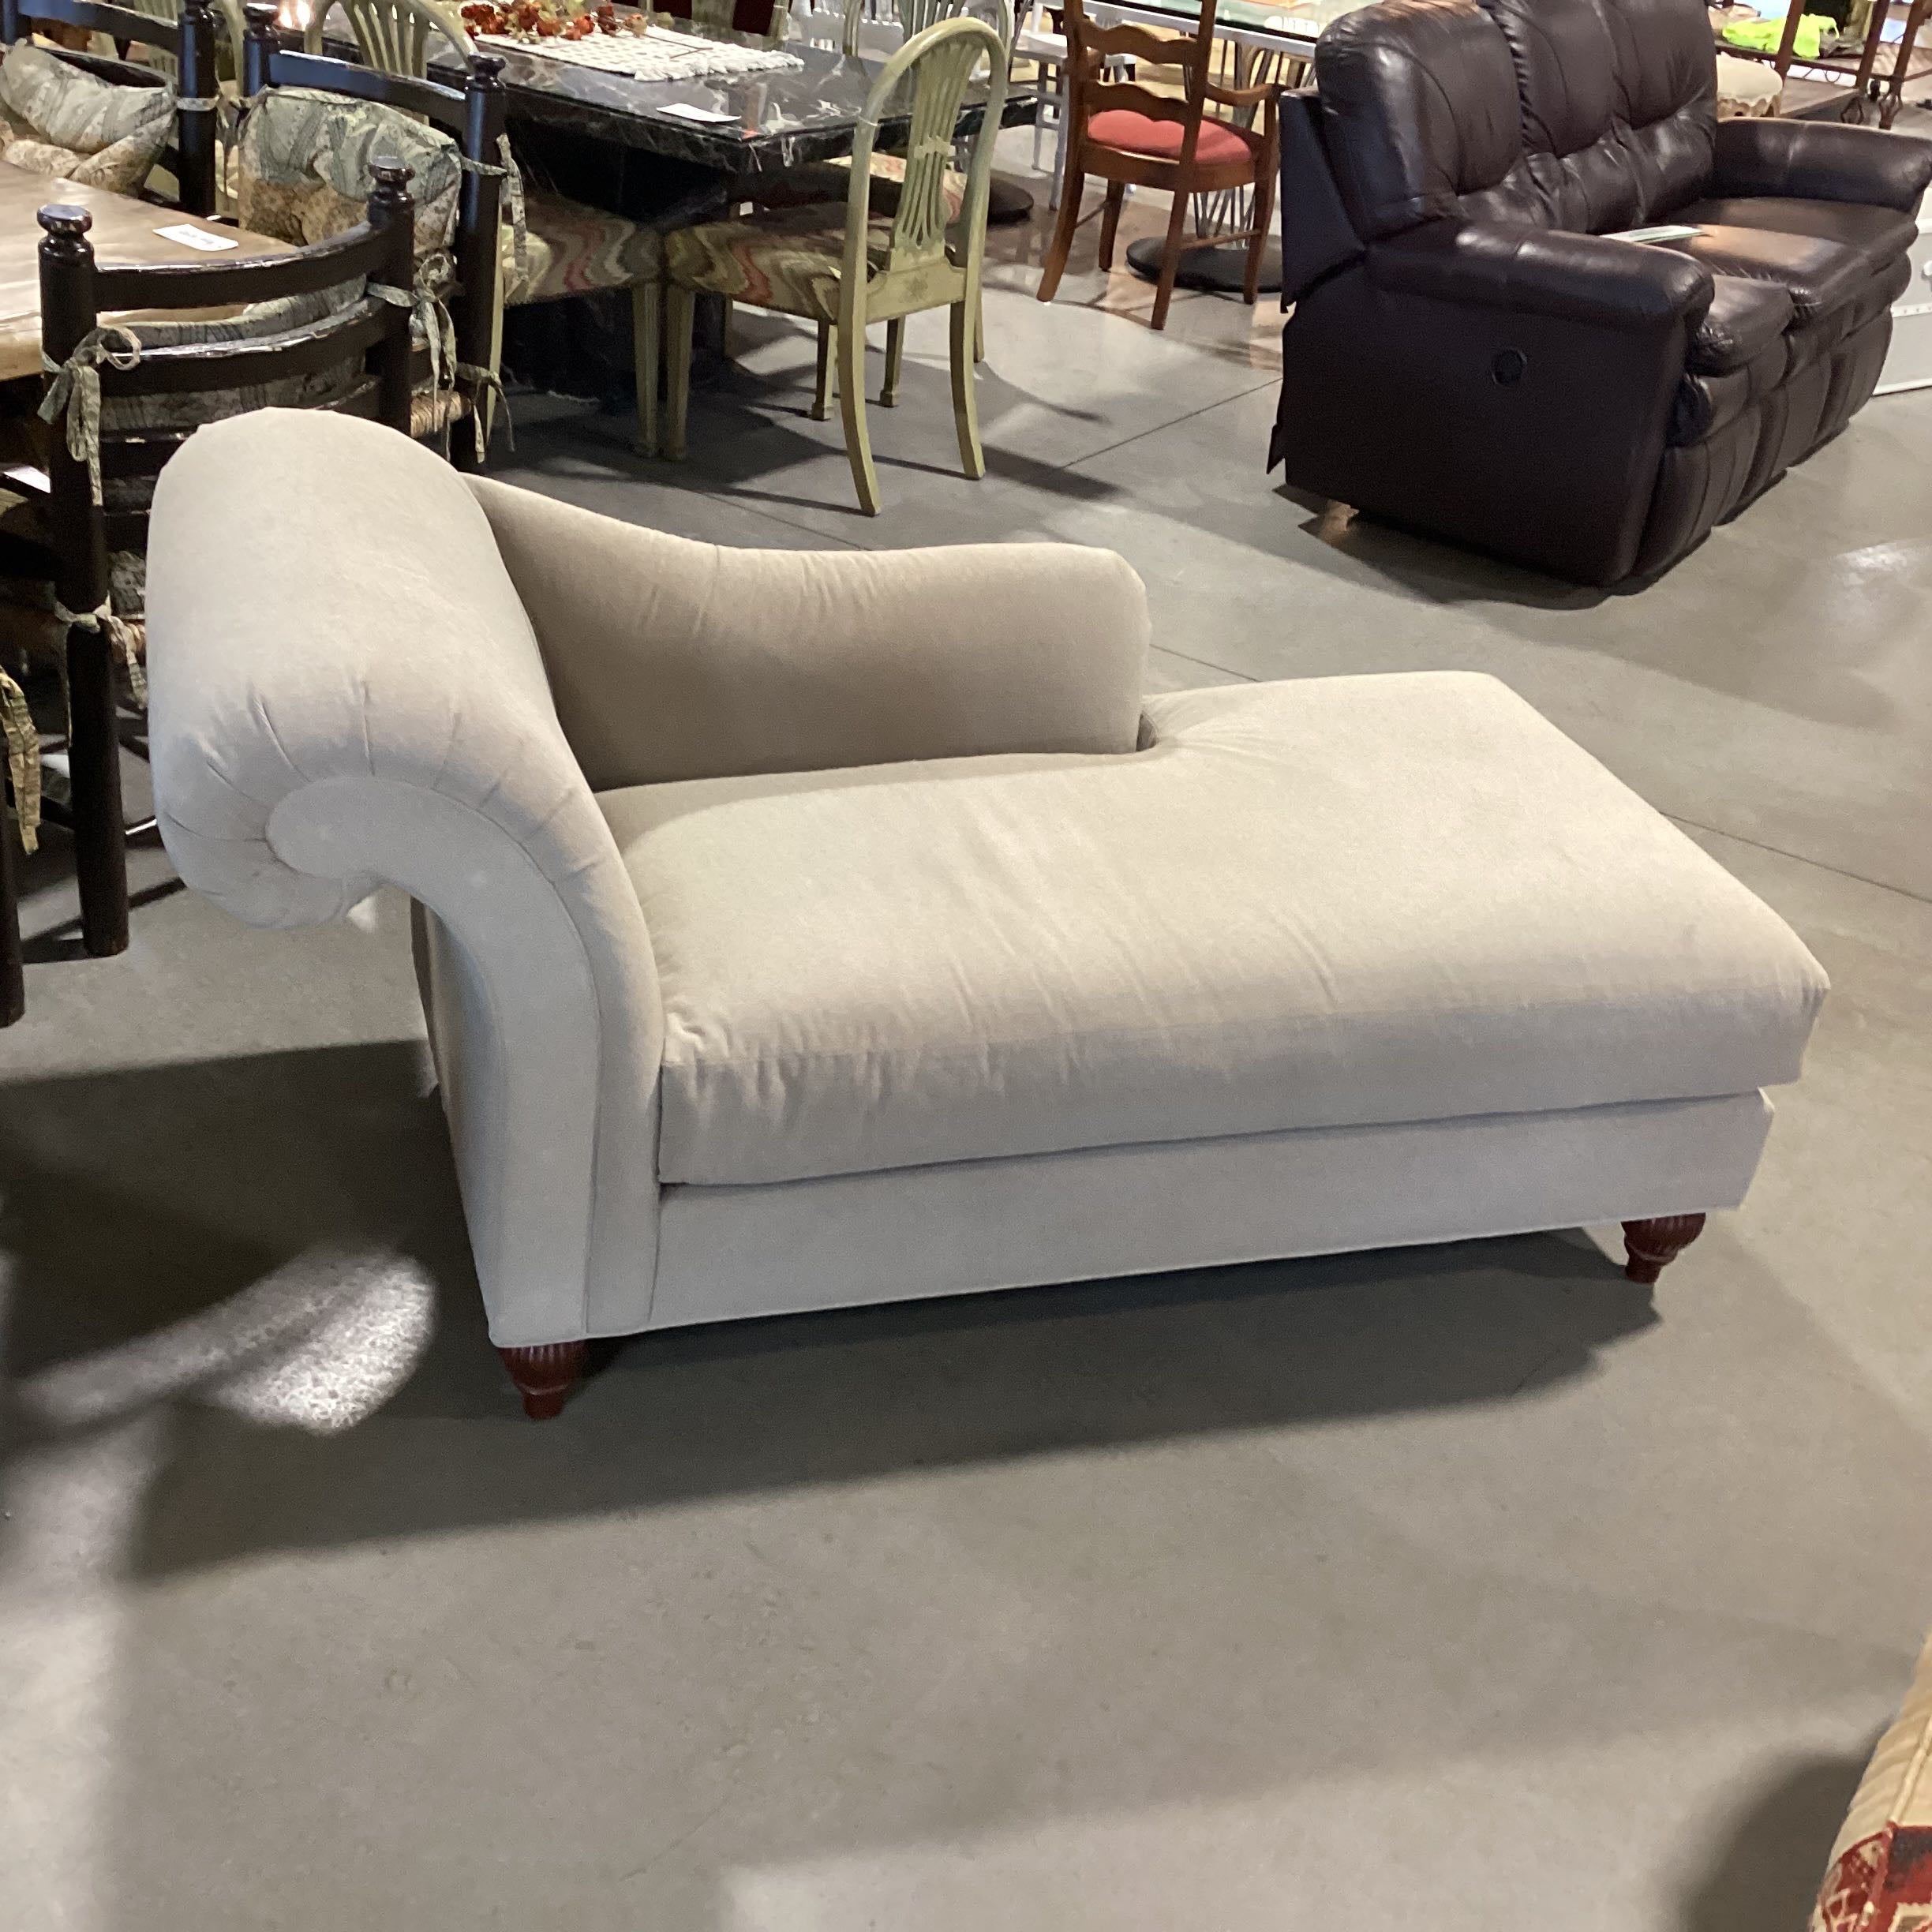 Baker Furniture Milling Road Chaise Lounge